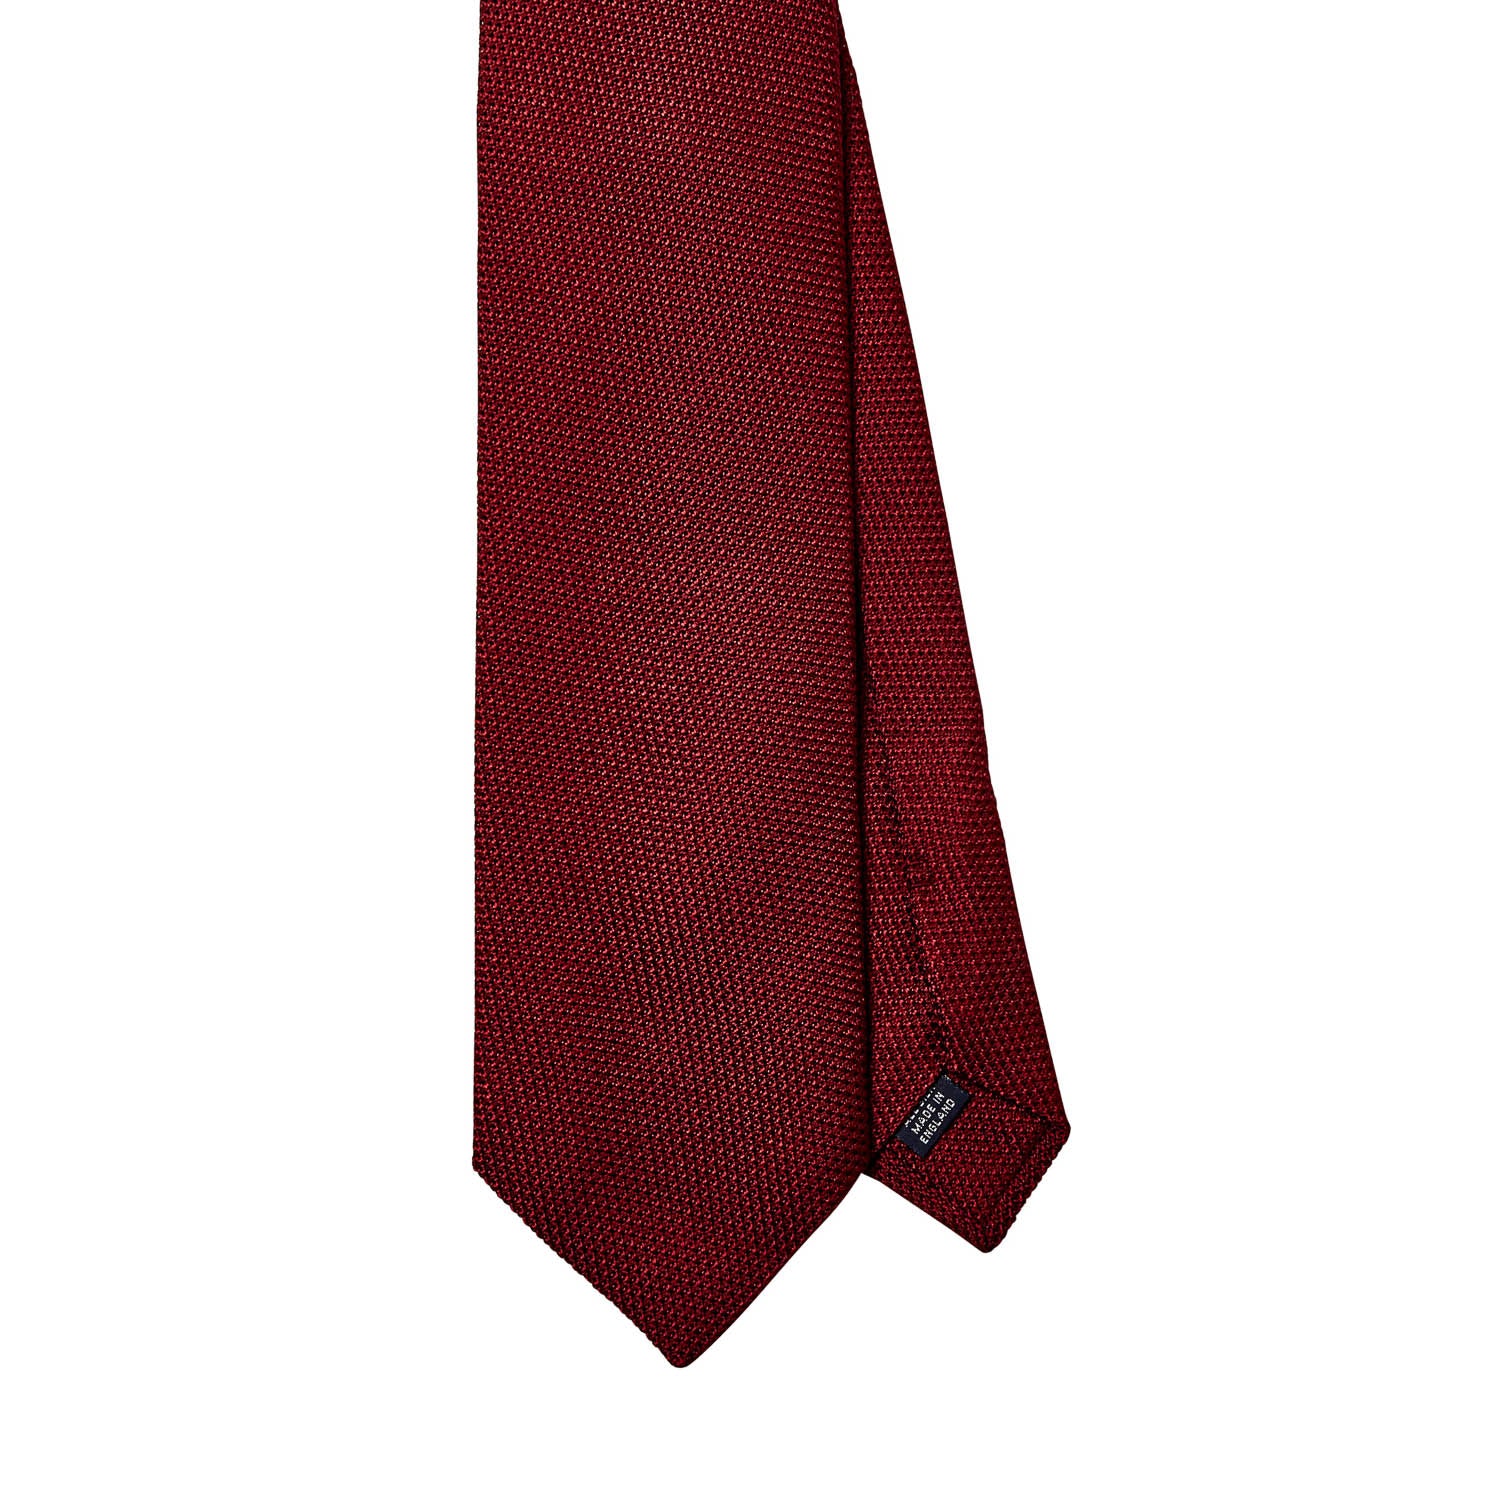 A Sovereign Grade Grenadine Fina Ruby Tie handmade by KirbyAllison.com in the United Kingdom on a white background.